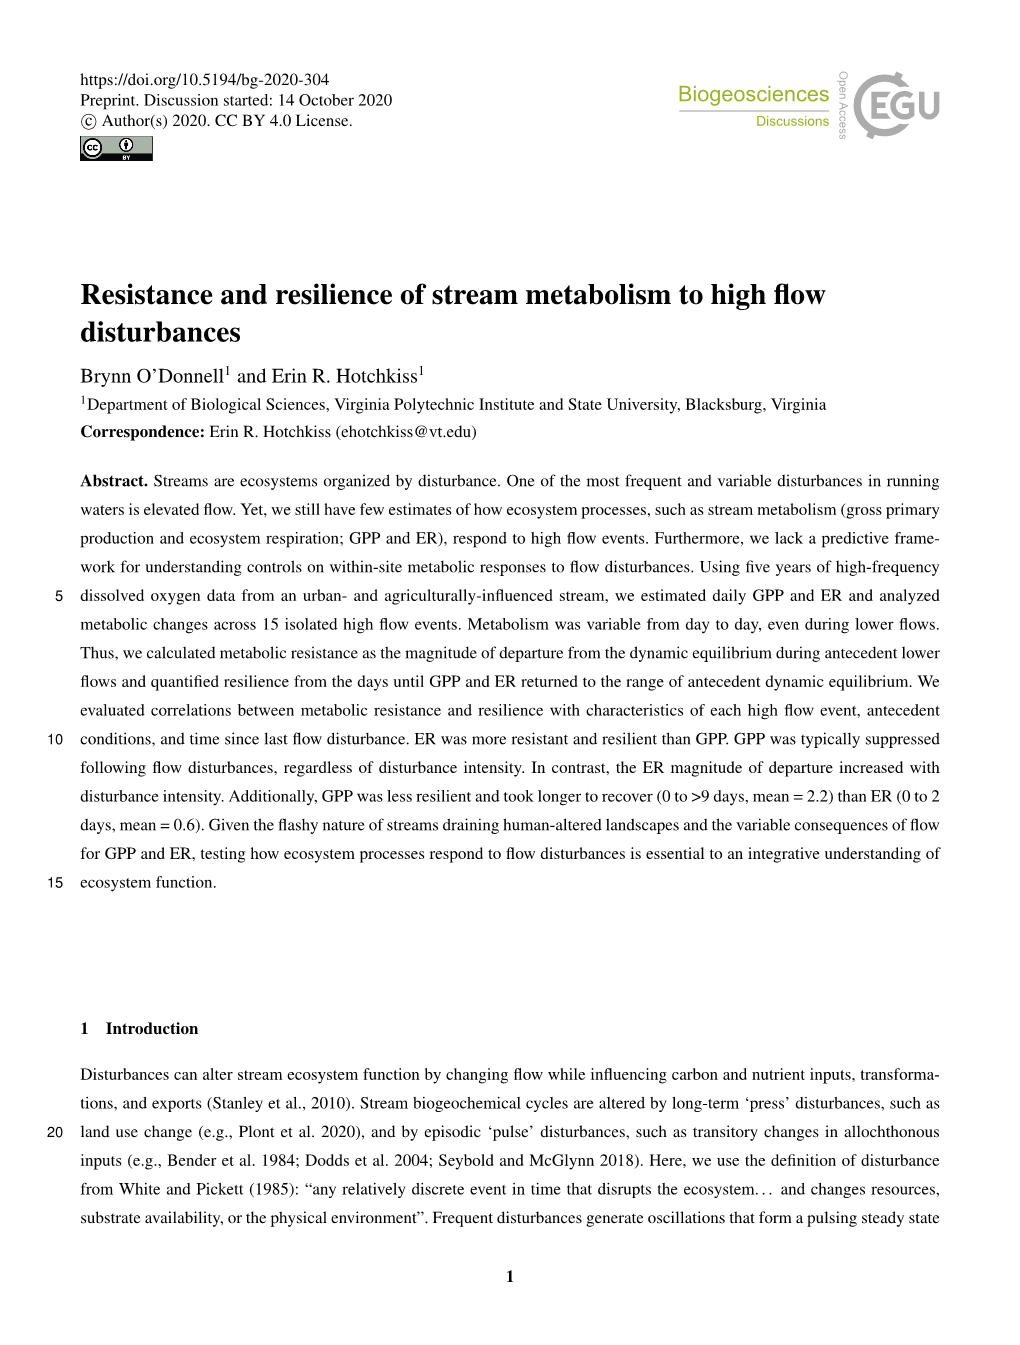 Resistance and Resilience of Stream Metabolism to High Flow Disturbances